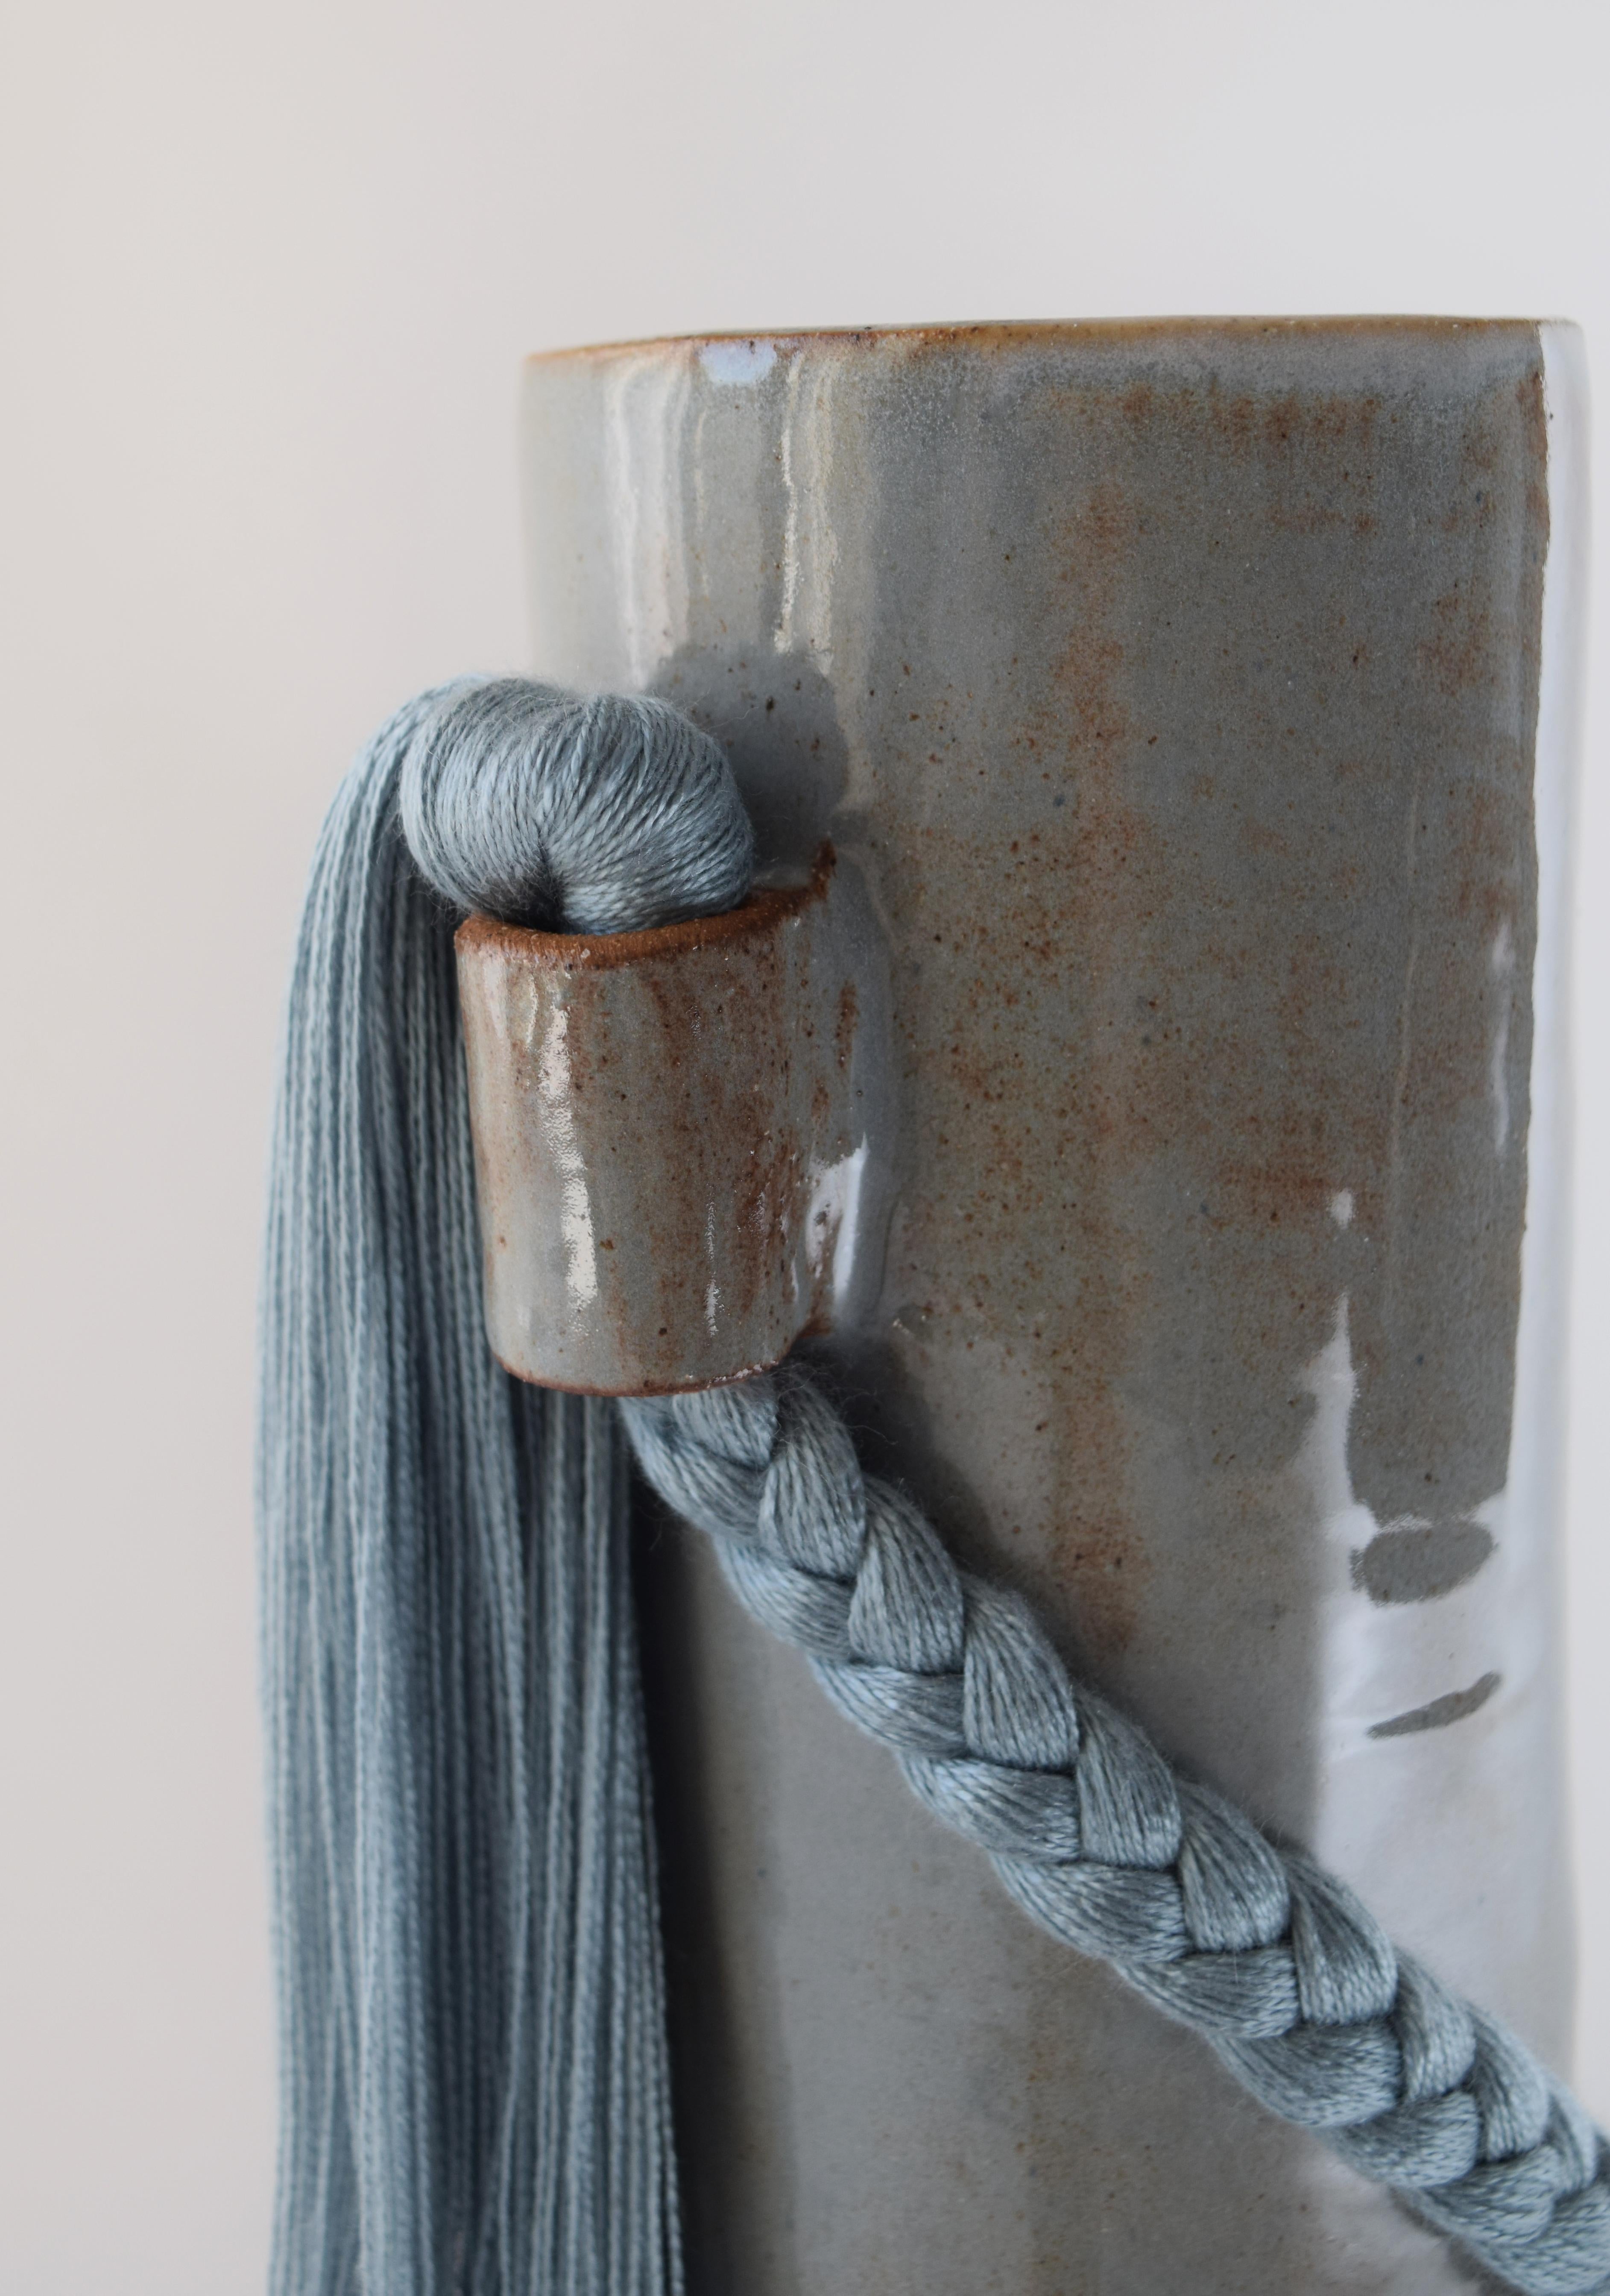 American Handmade Ceramic Vase #695 in Light Blue with Blue Tencel Braid and Fringe For Sale